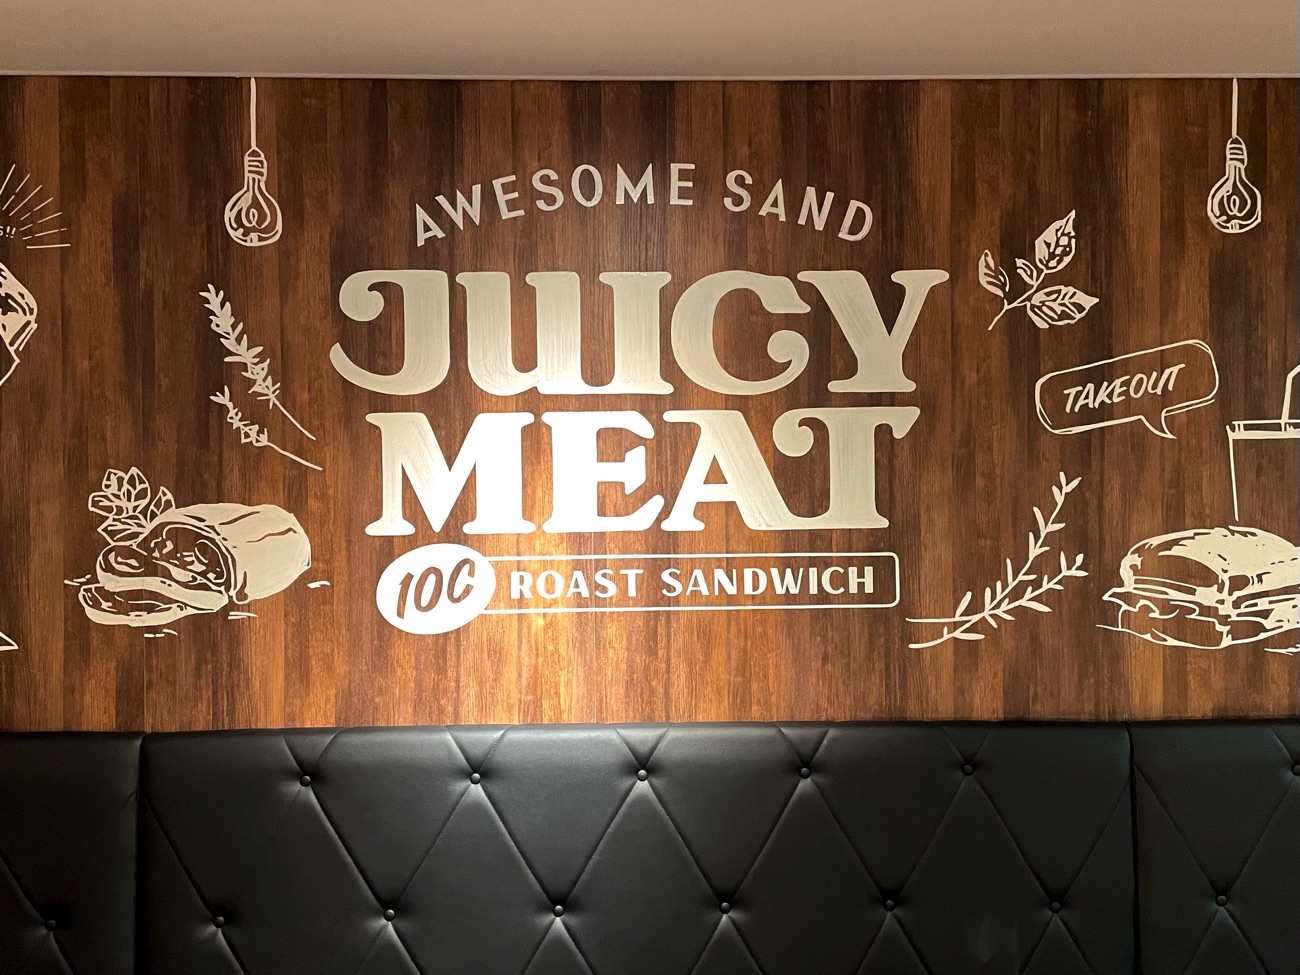 「JUICY MEAT」のロゴ